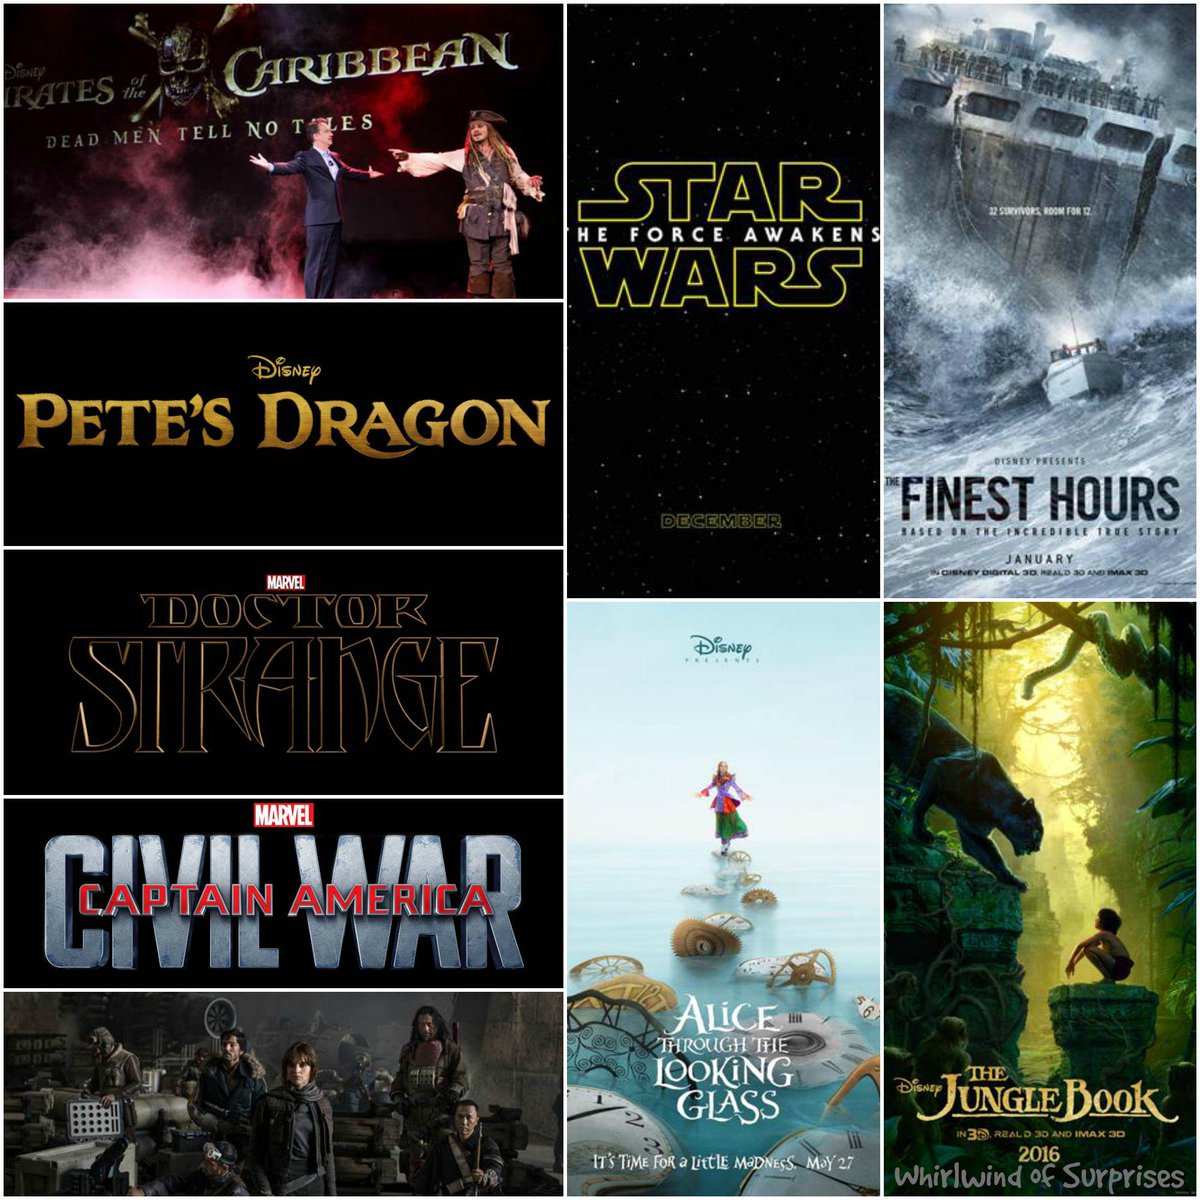 New Disney, Marvel, and Star Wars movies